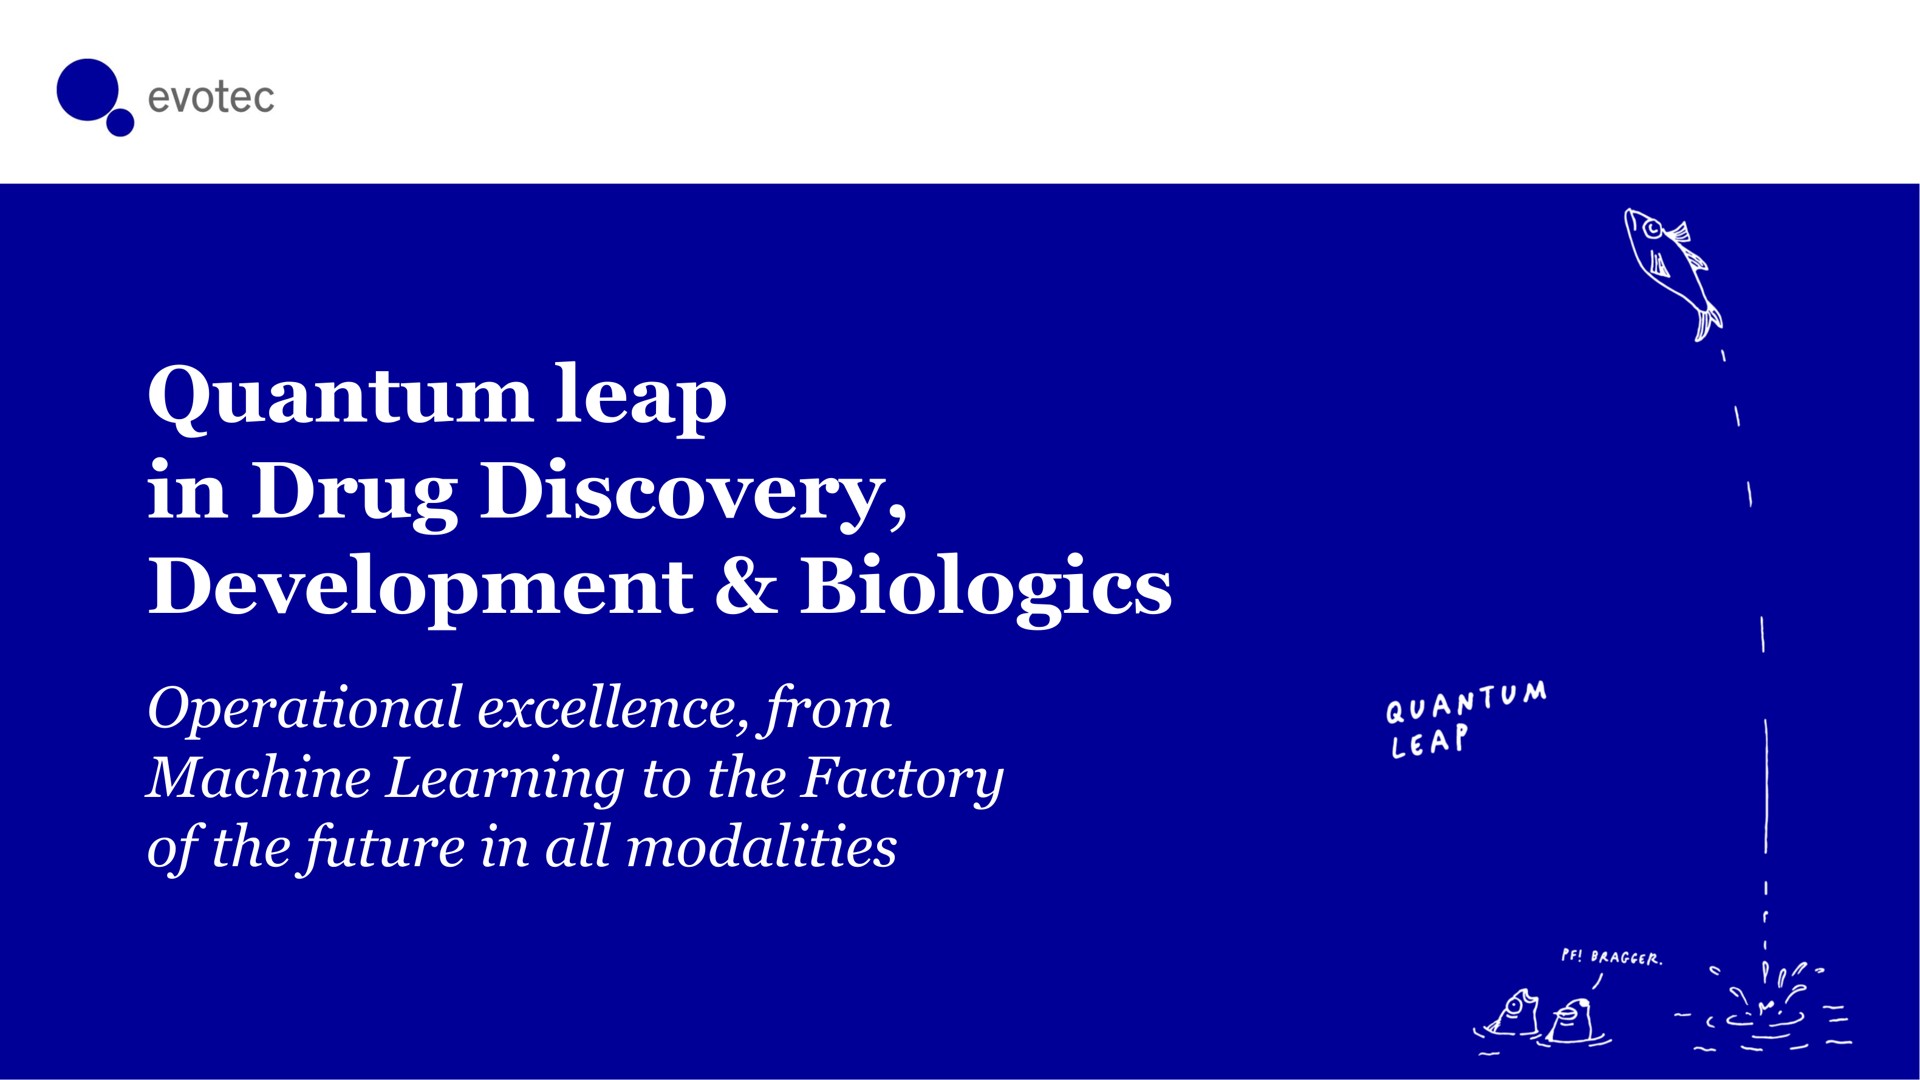 quantum leap in drug discovery development operational excellence from machine learning to the factory of the future in all modalities | Evotec